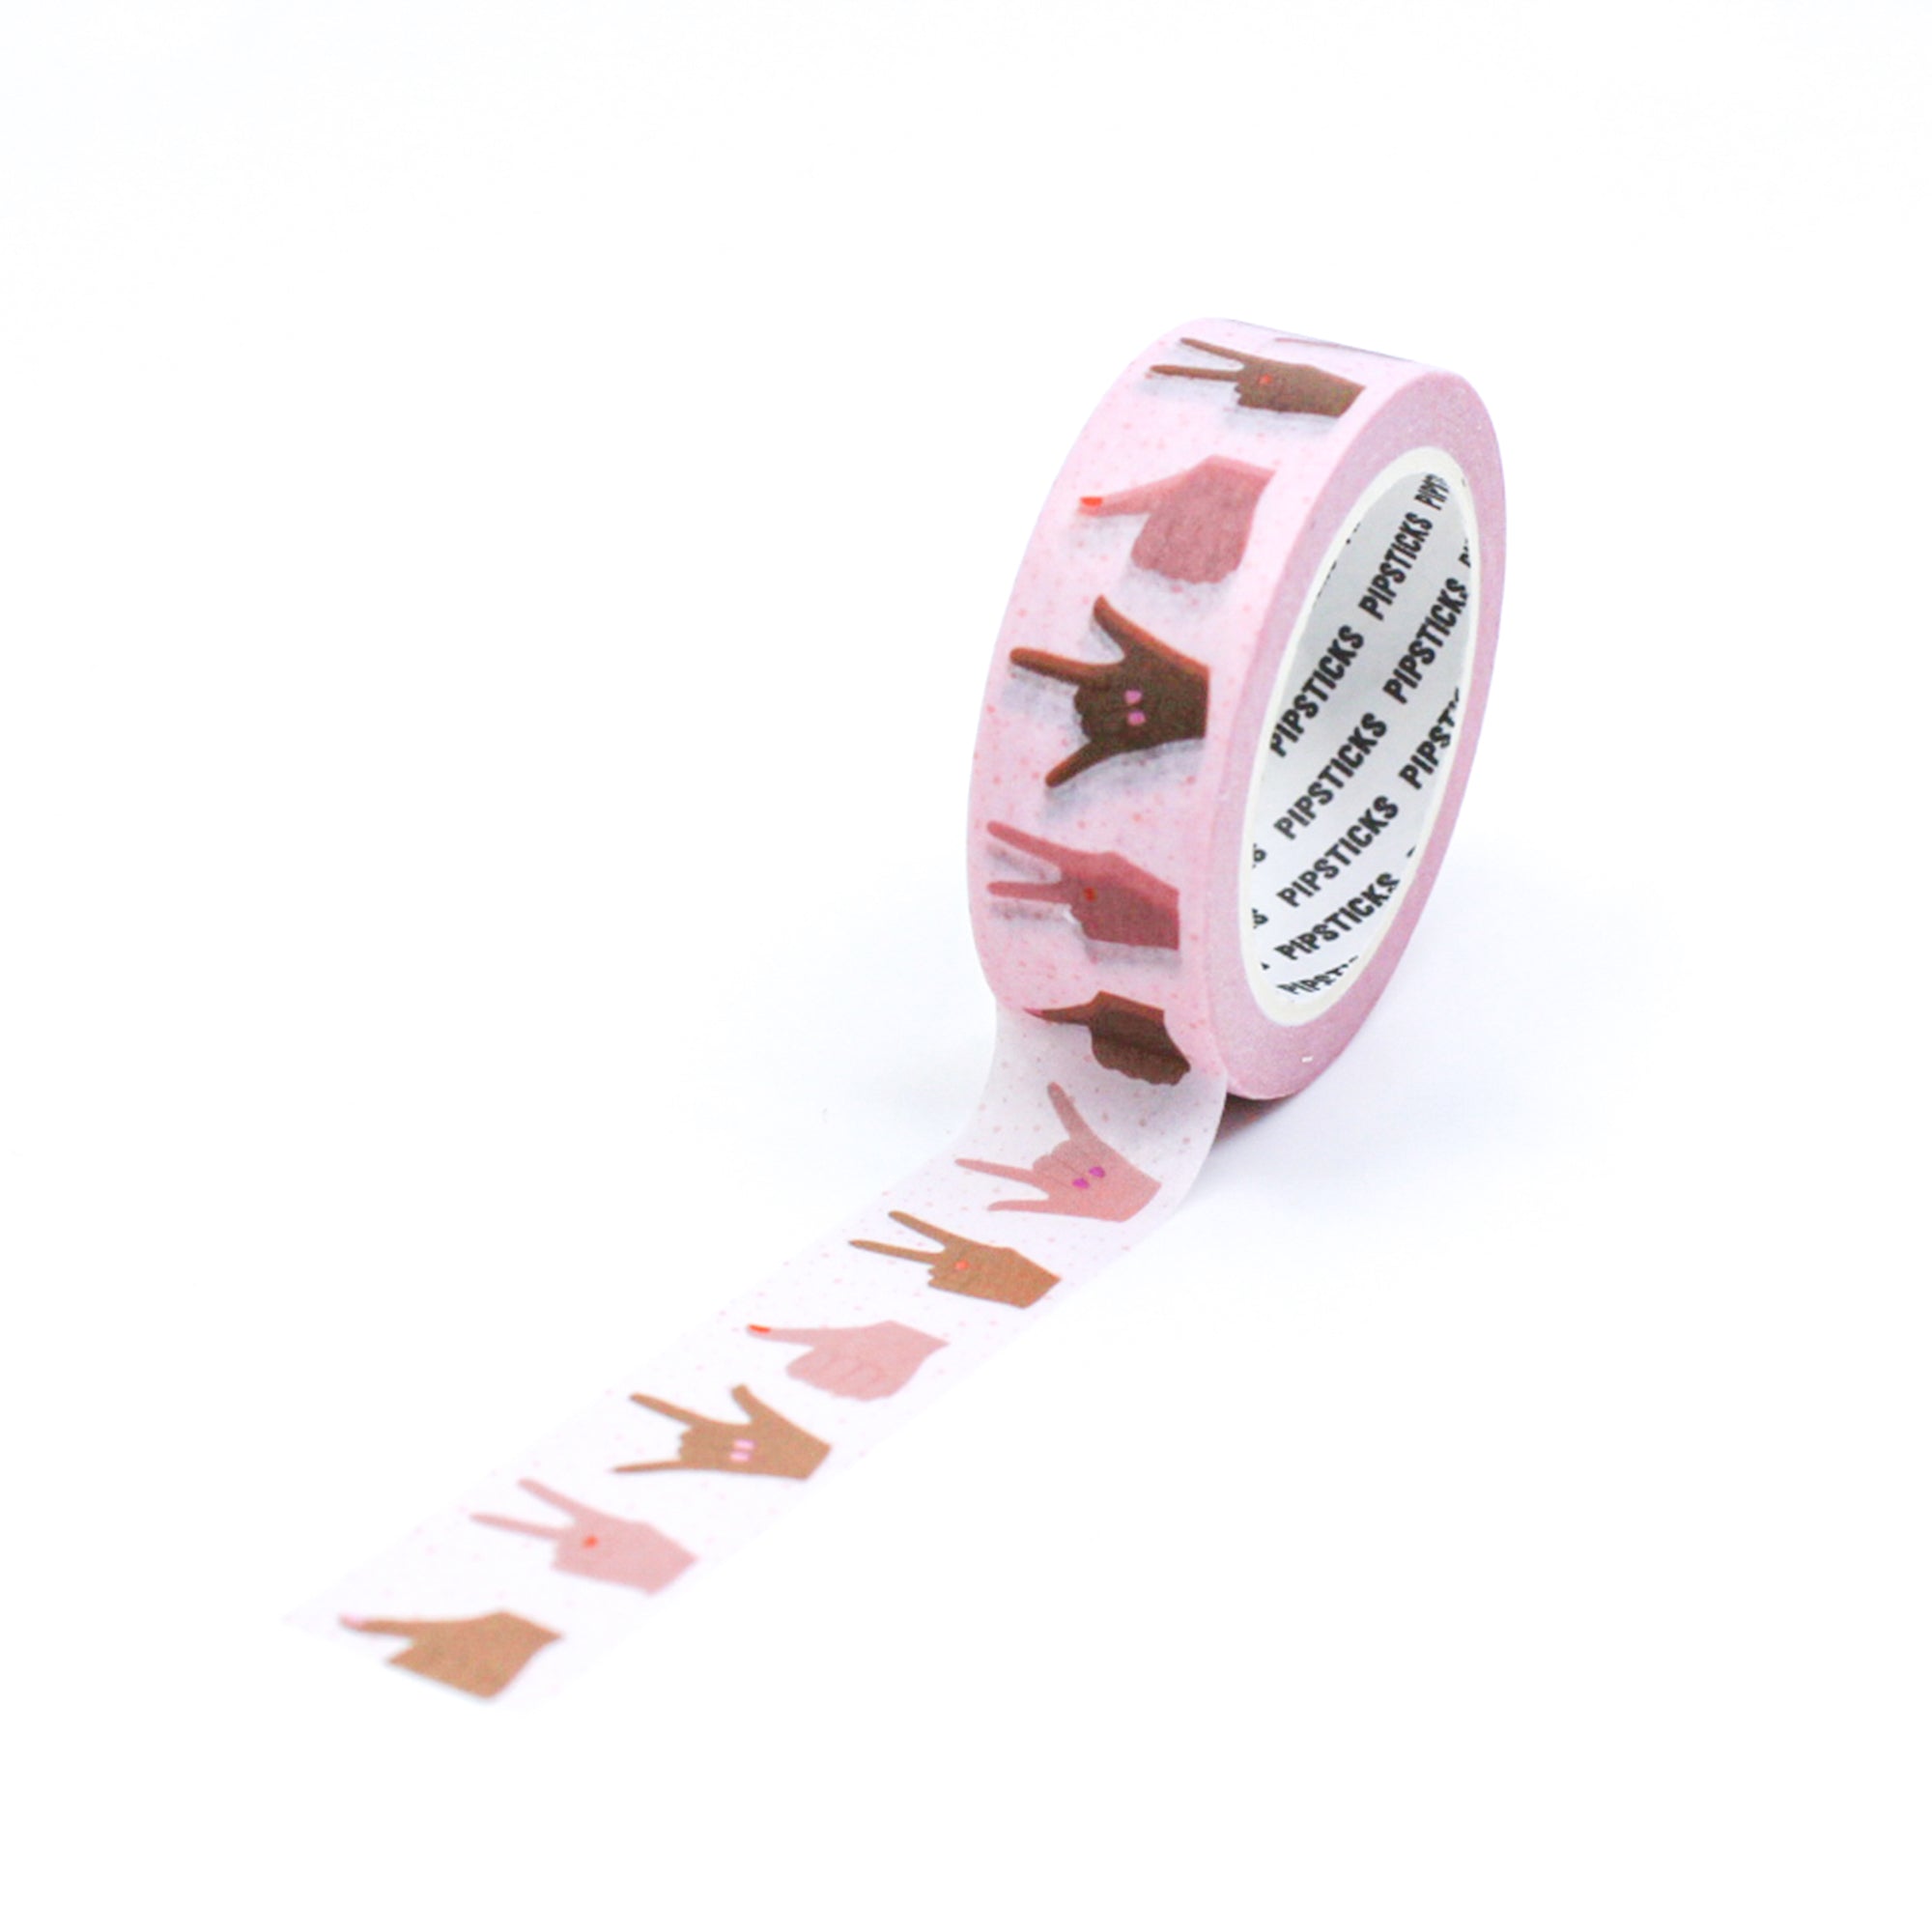 Express yourself with our ALS Hand Gesture Washi Tape, featuring a collection of hand signs associated with ALS awareness. Ideal for raising awareness and showing support. This tape is from Pipsticks and sold at BBB Supplies Craft Shop.